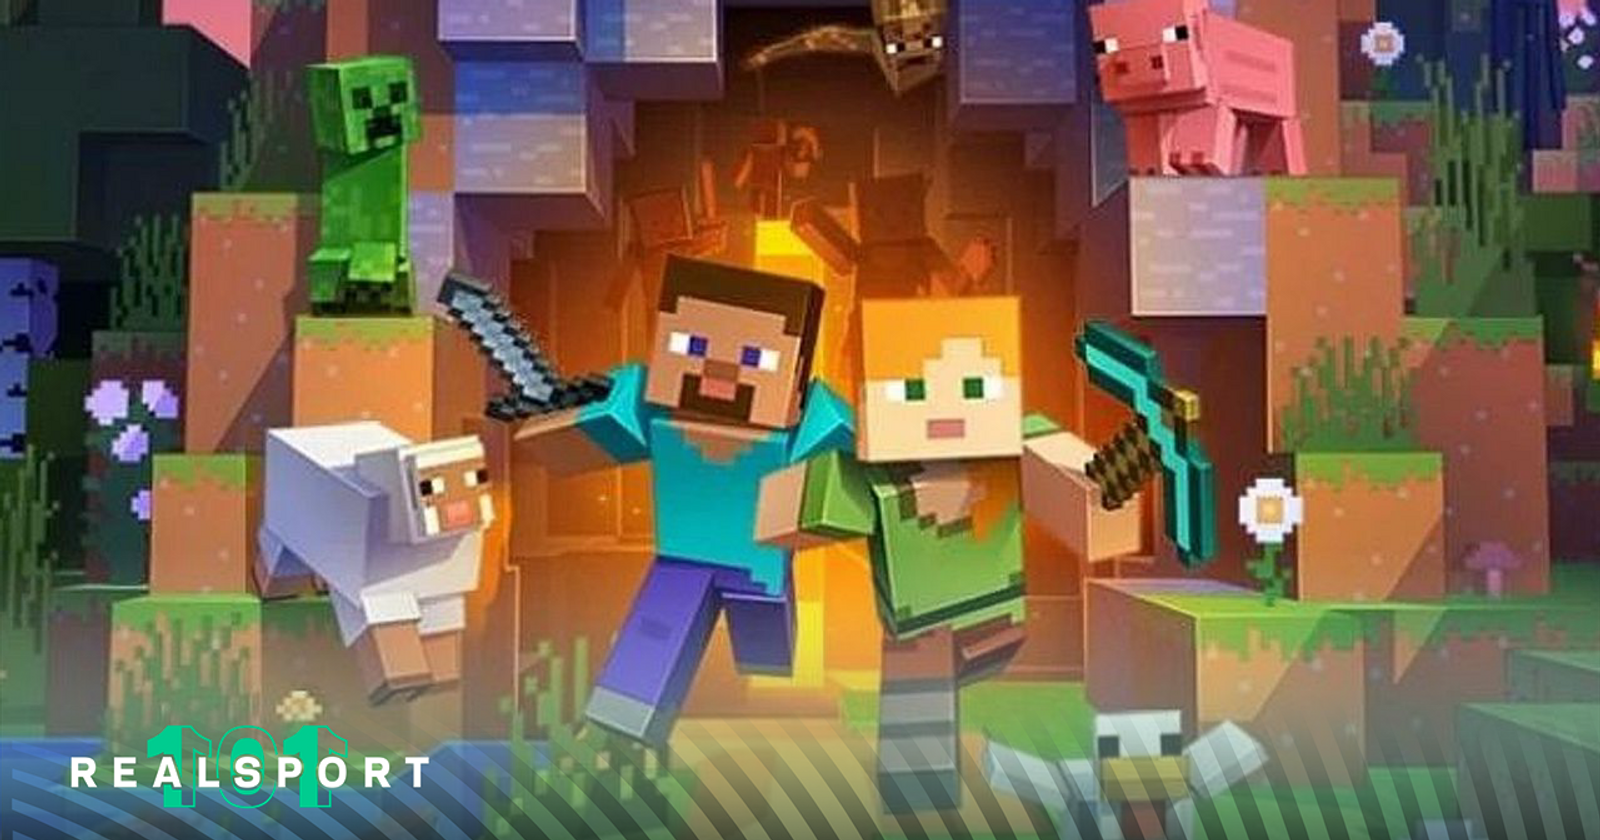 Minecraft Realms Available Now - Game Informer